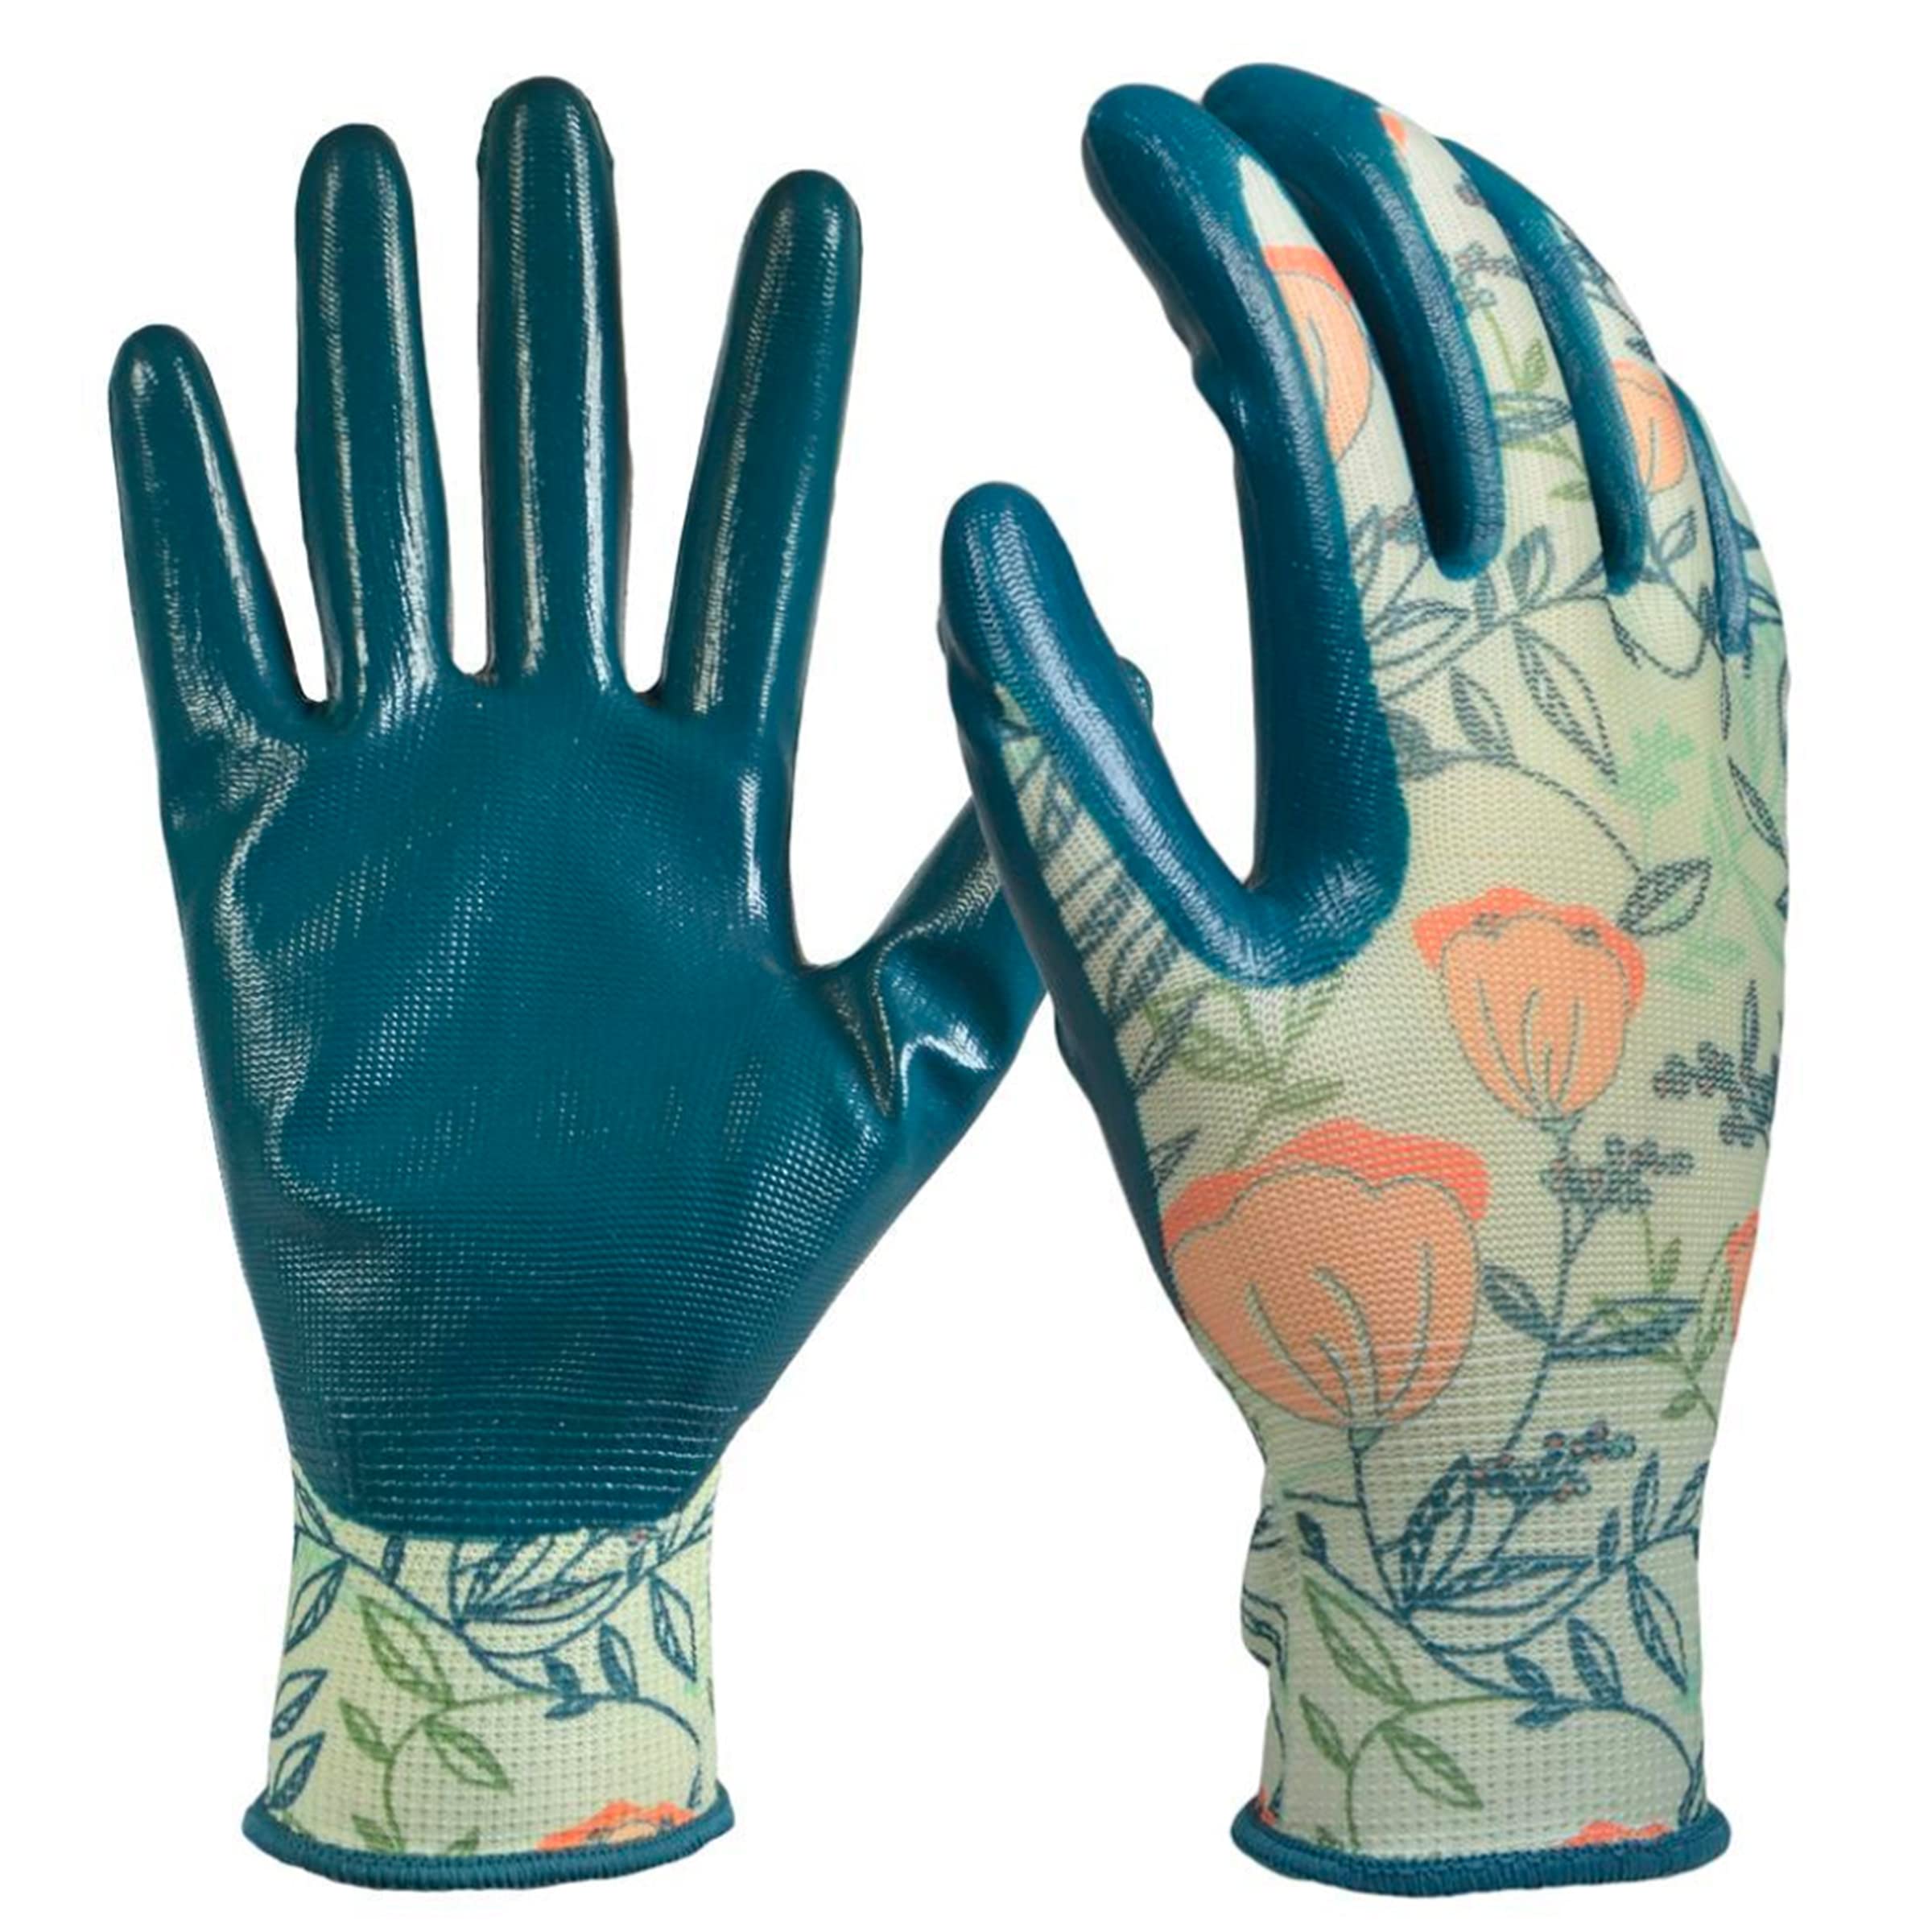 Digz Stretch Knit Garden Gloves with Nitrile Coating